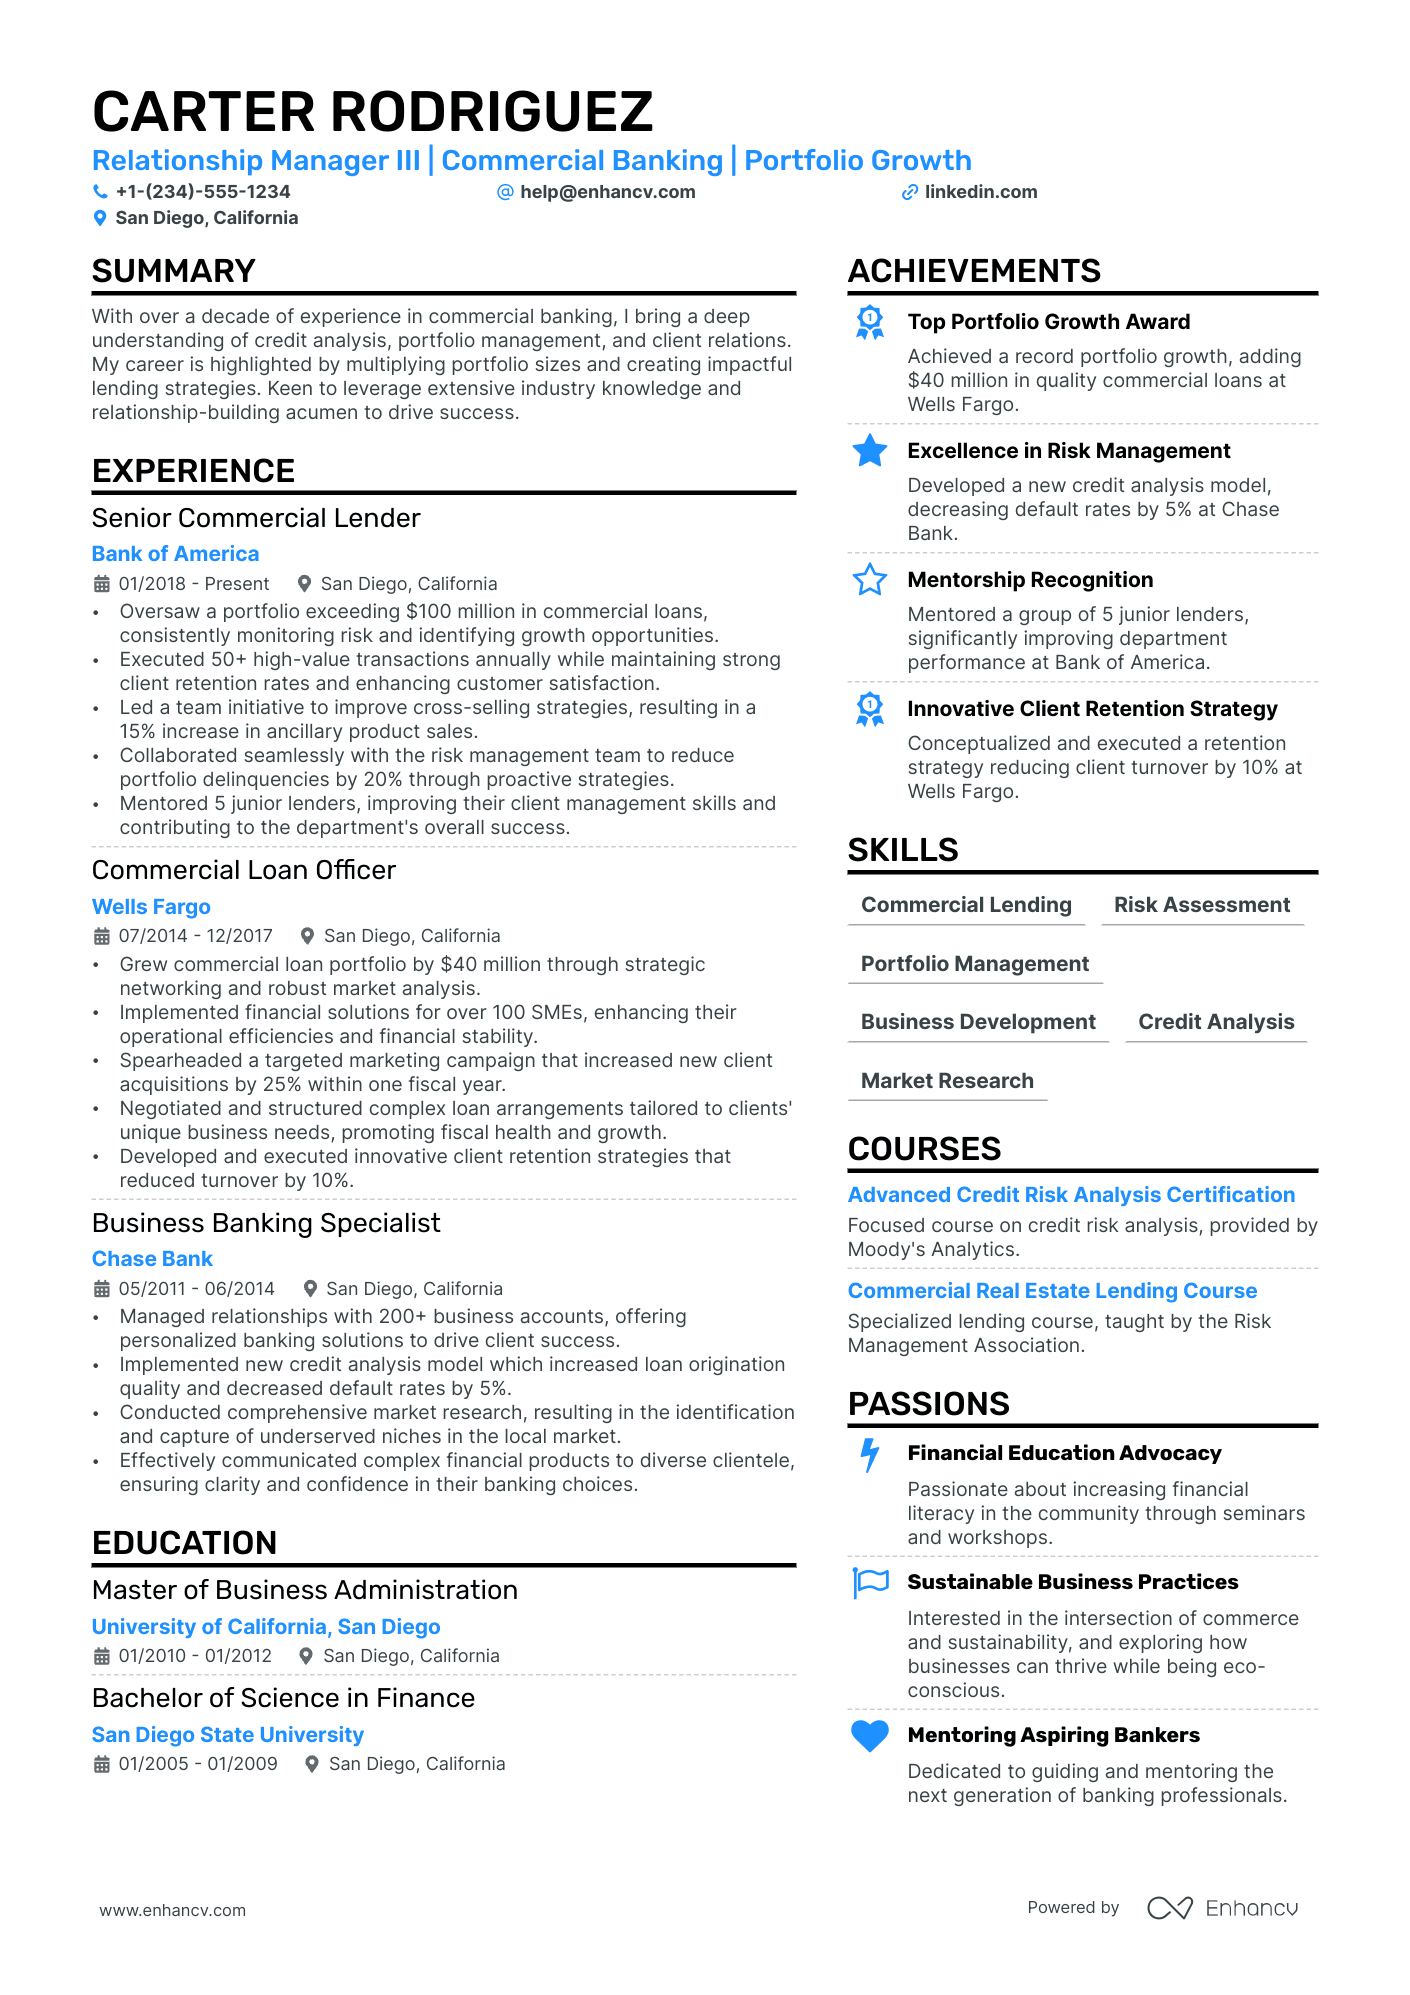 Relationship Manager resume example